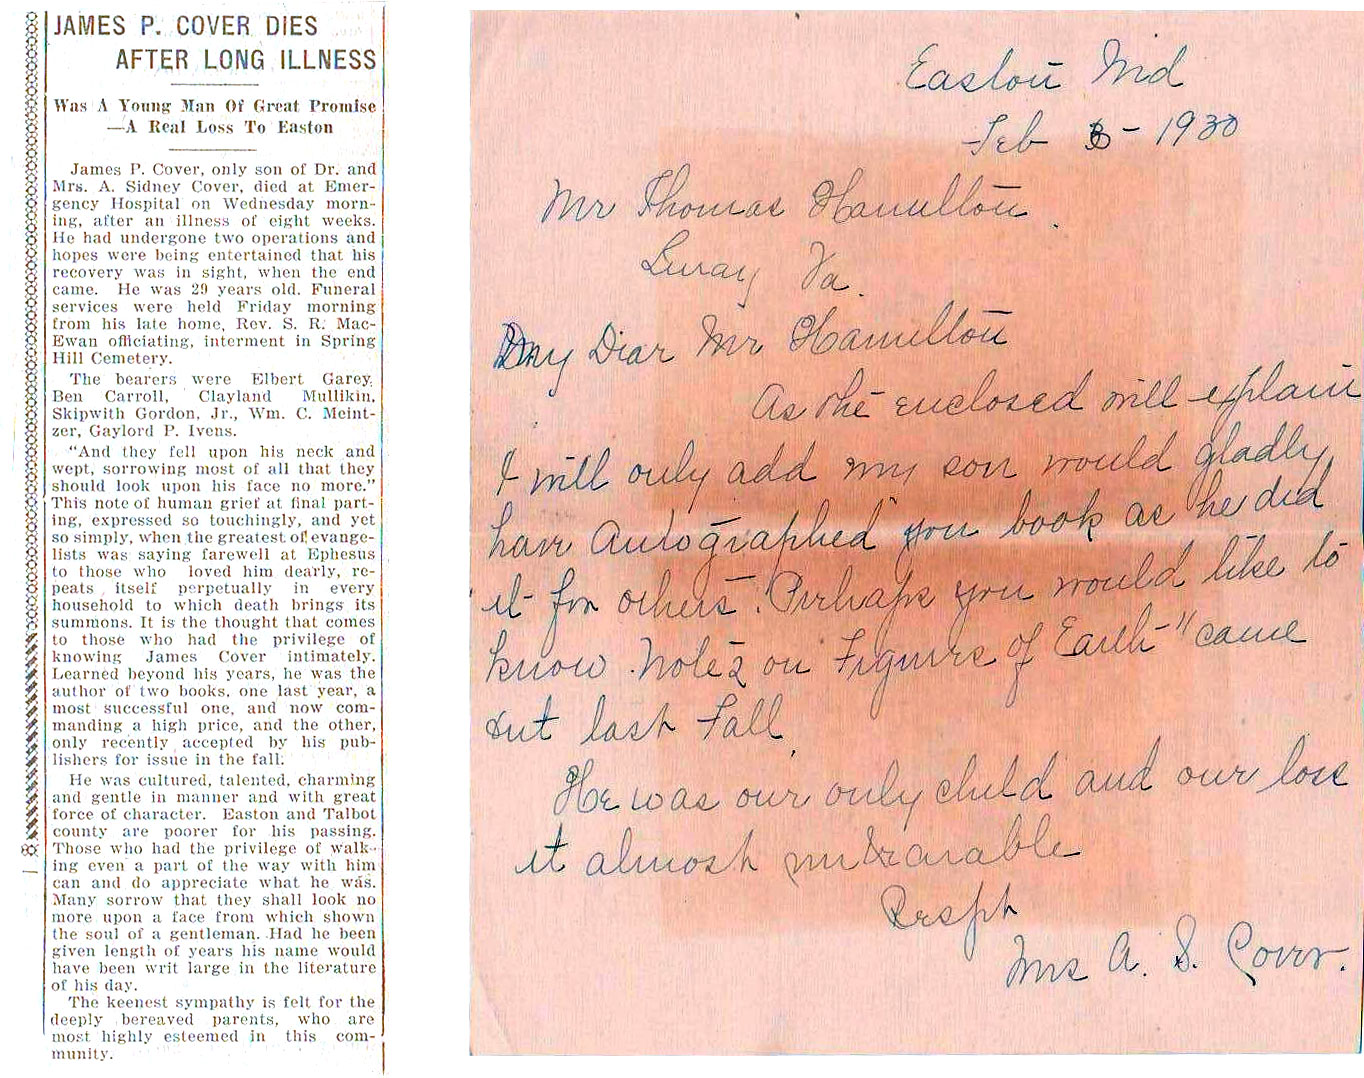 cover obituary and letter